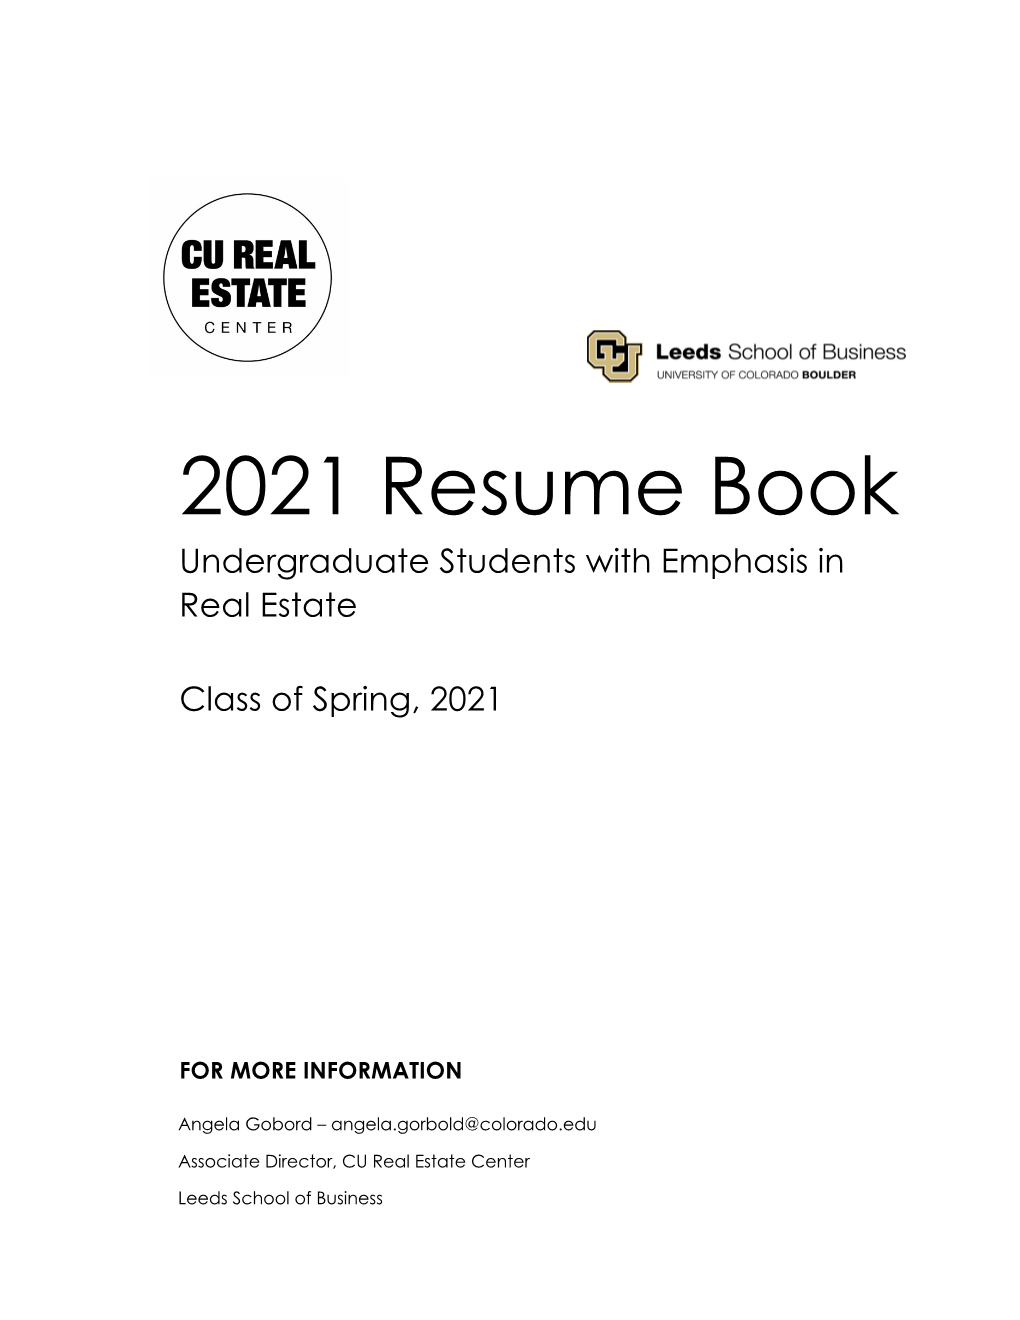 2021 Resume Book Undergraduate Students with Emphasis in Real Estate